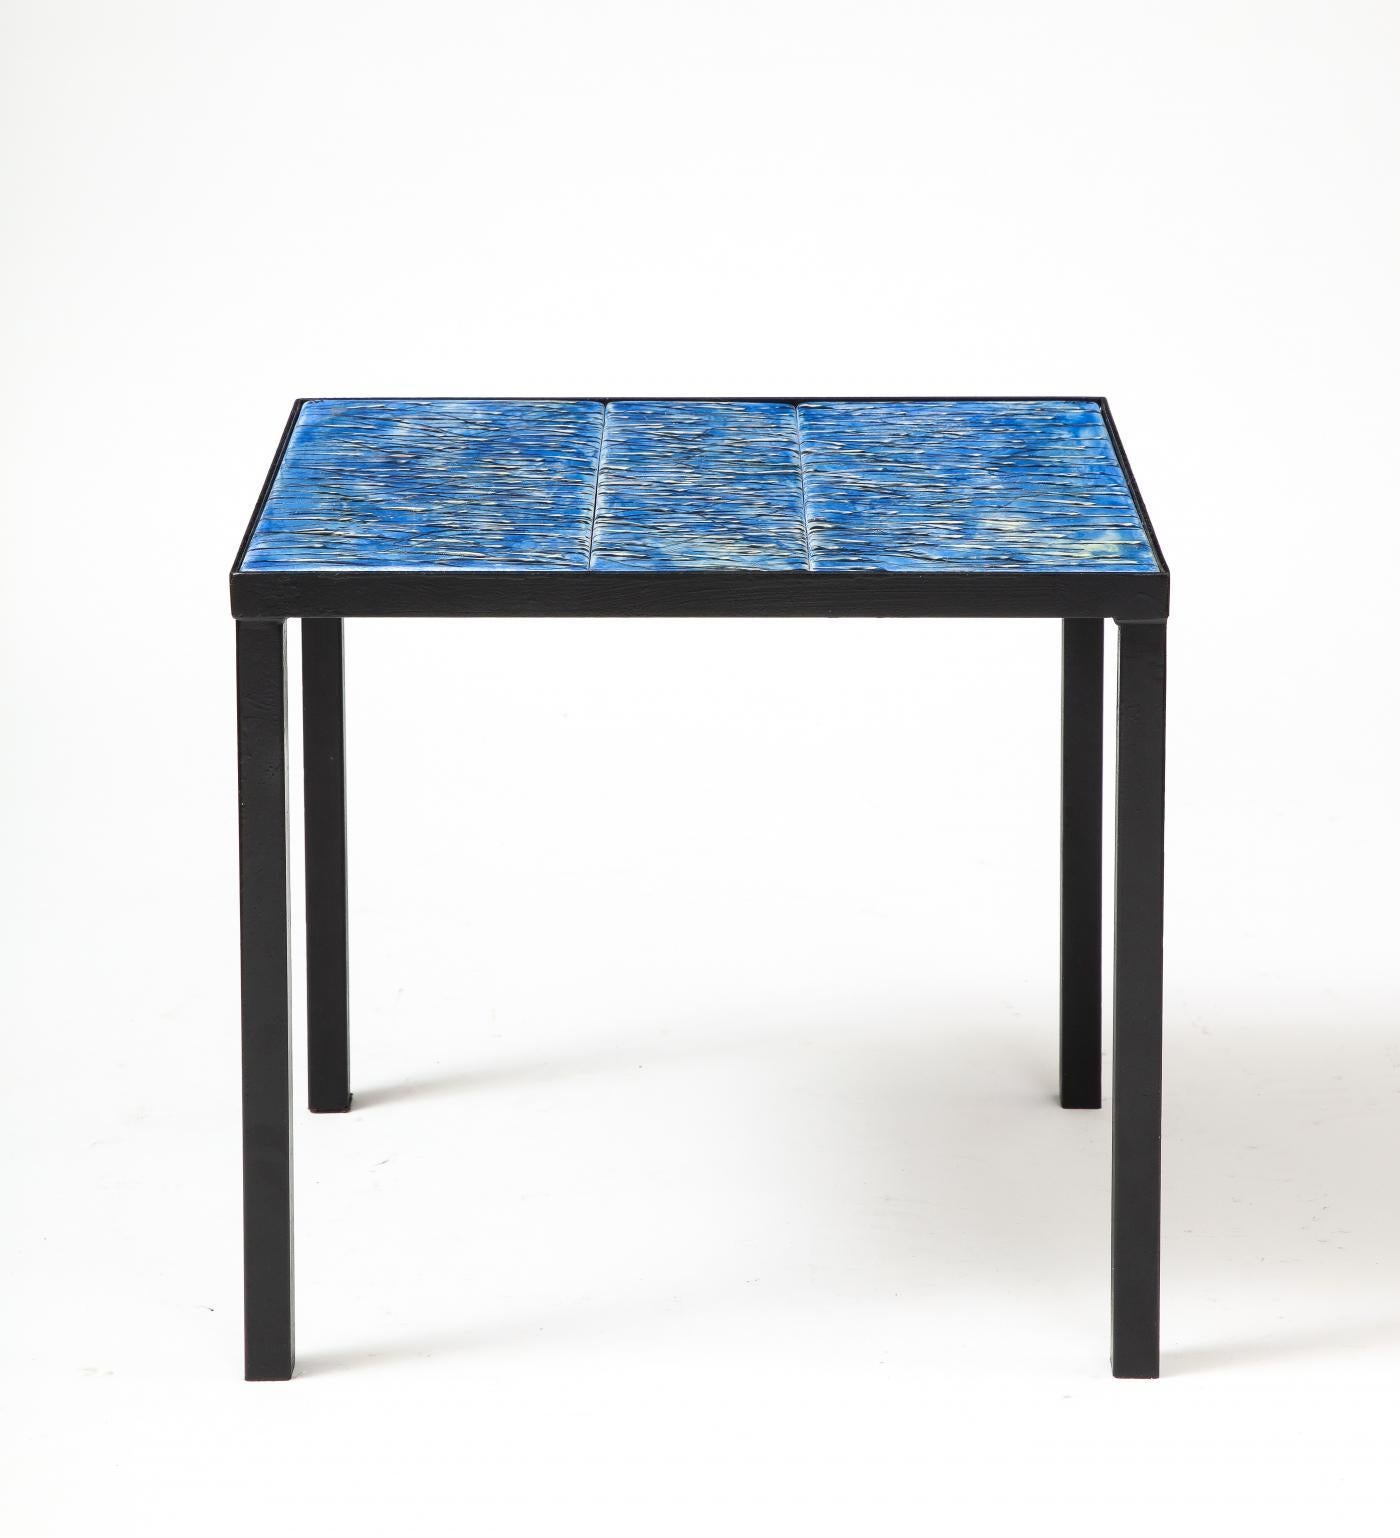 Modern, minimalist side table with seamlessly integrated expressive hand-painted tiles.